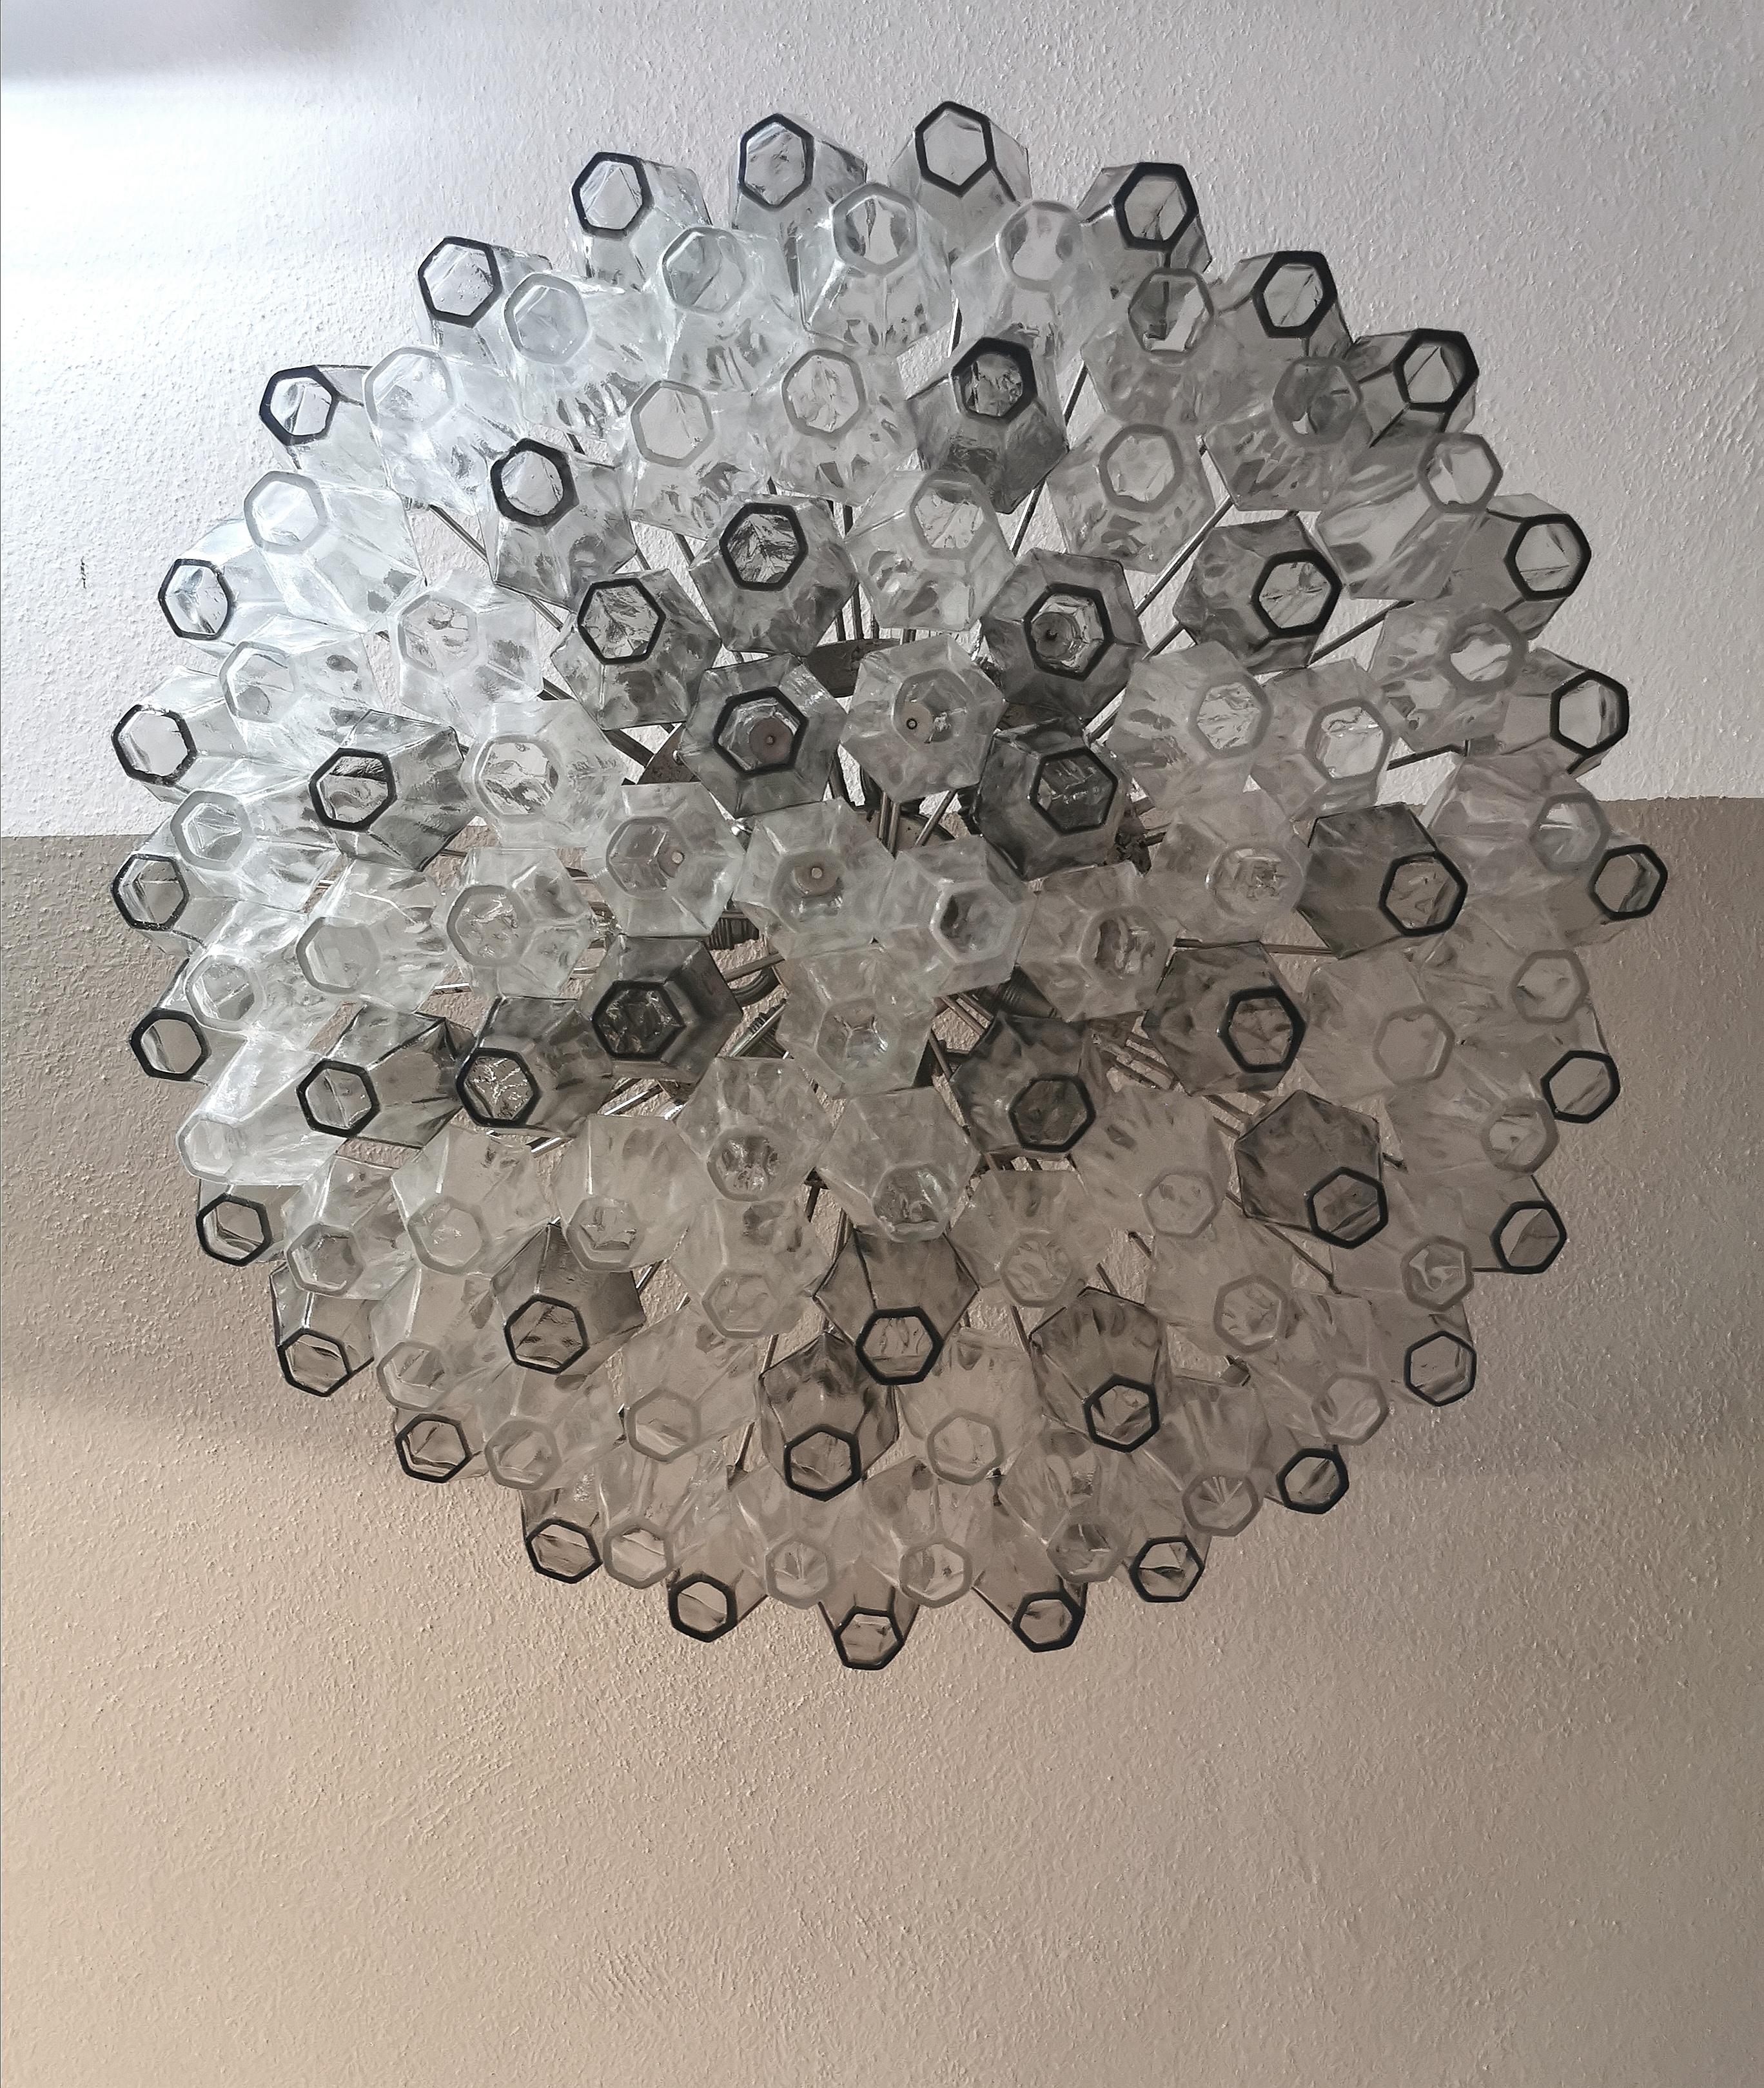 Chandelier designed by the Italian designer Carlo Scarpa and produced by the prestigious Venetian company Venini in the 1960s. The chandelier has 102 gray and transparent Murano glass 